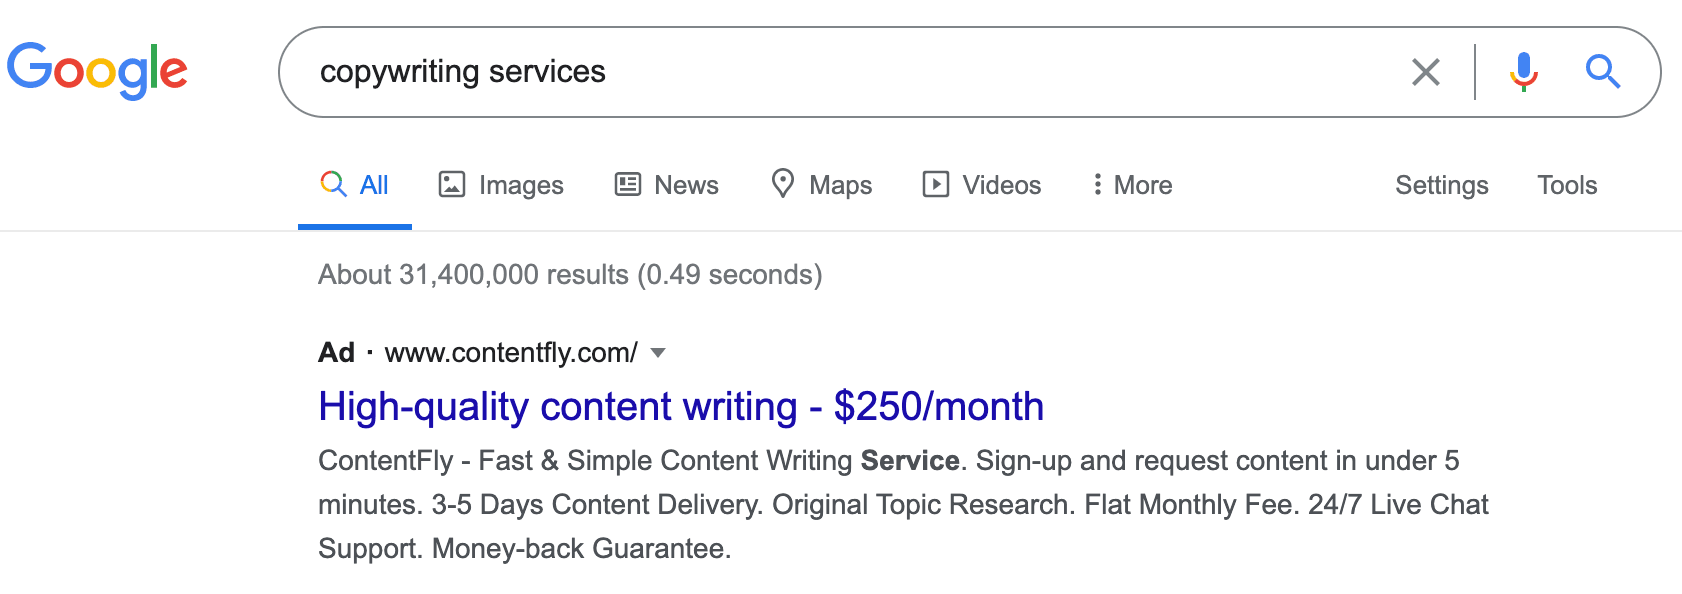 Google Ads Copywriting Services Example